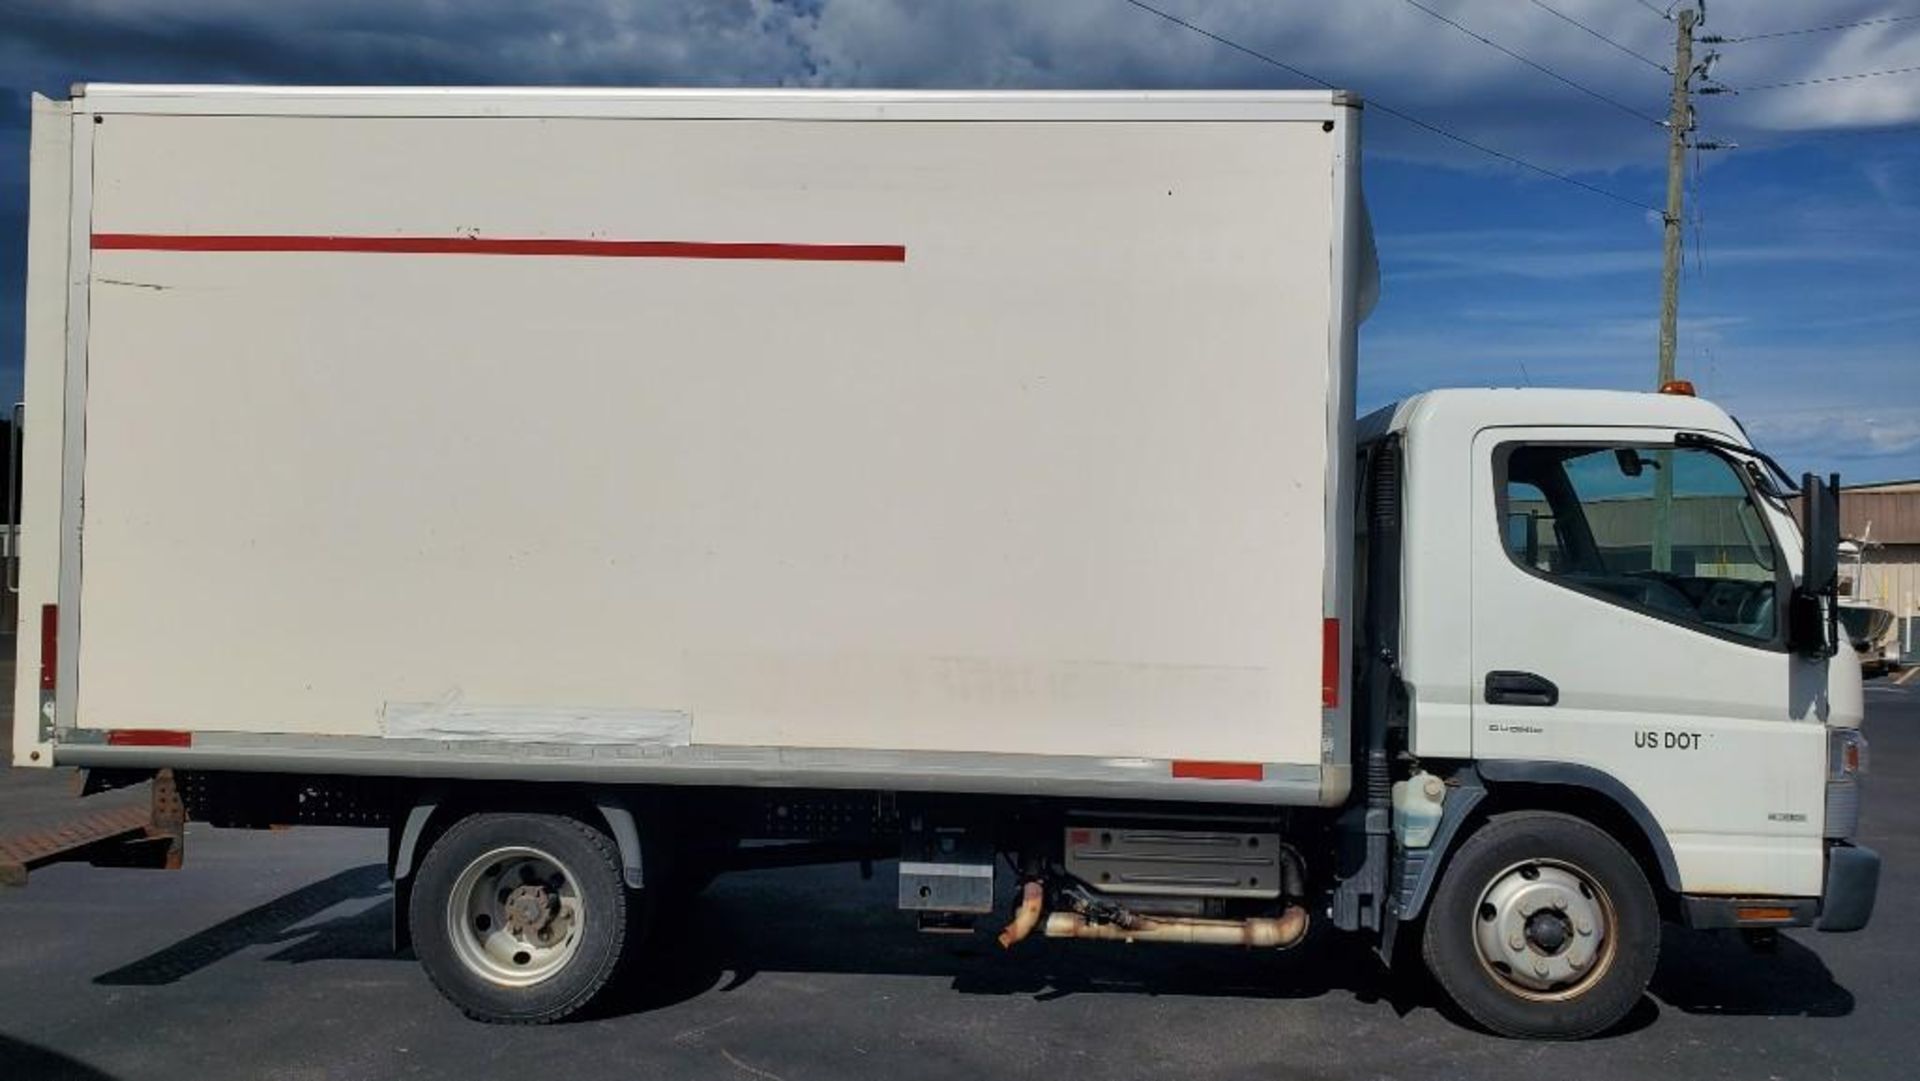 2015 MITSUBISHI FUSO FE180 BOX TRUCK APPROX 14' BOX, DIESEL ENGINE, AUTOMATIC TRANSMISSION - Image 2 of 39